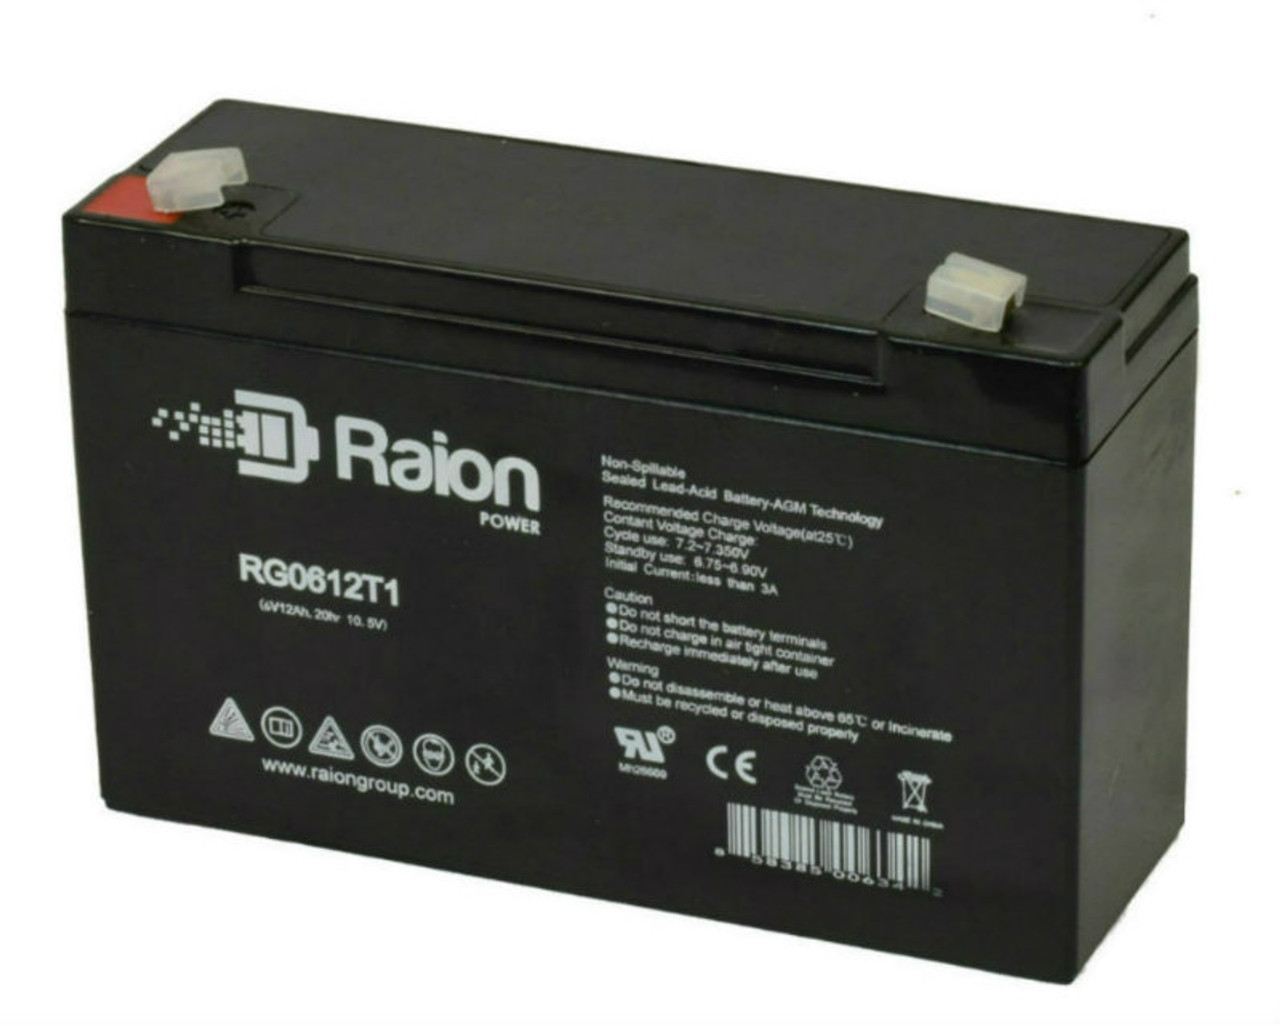 Raion Power RG06120T1 Replacement Emergency Light Battery for Mule 6GC056N